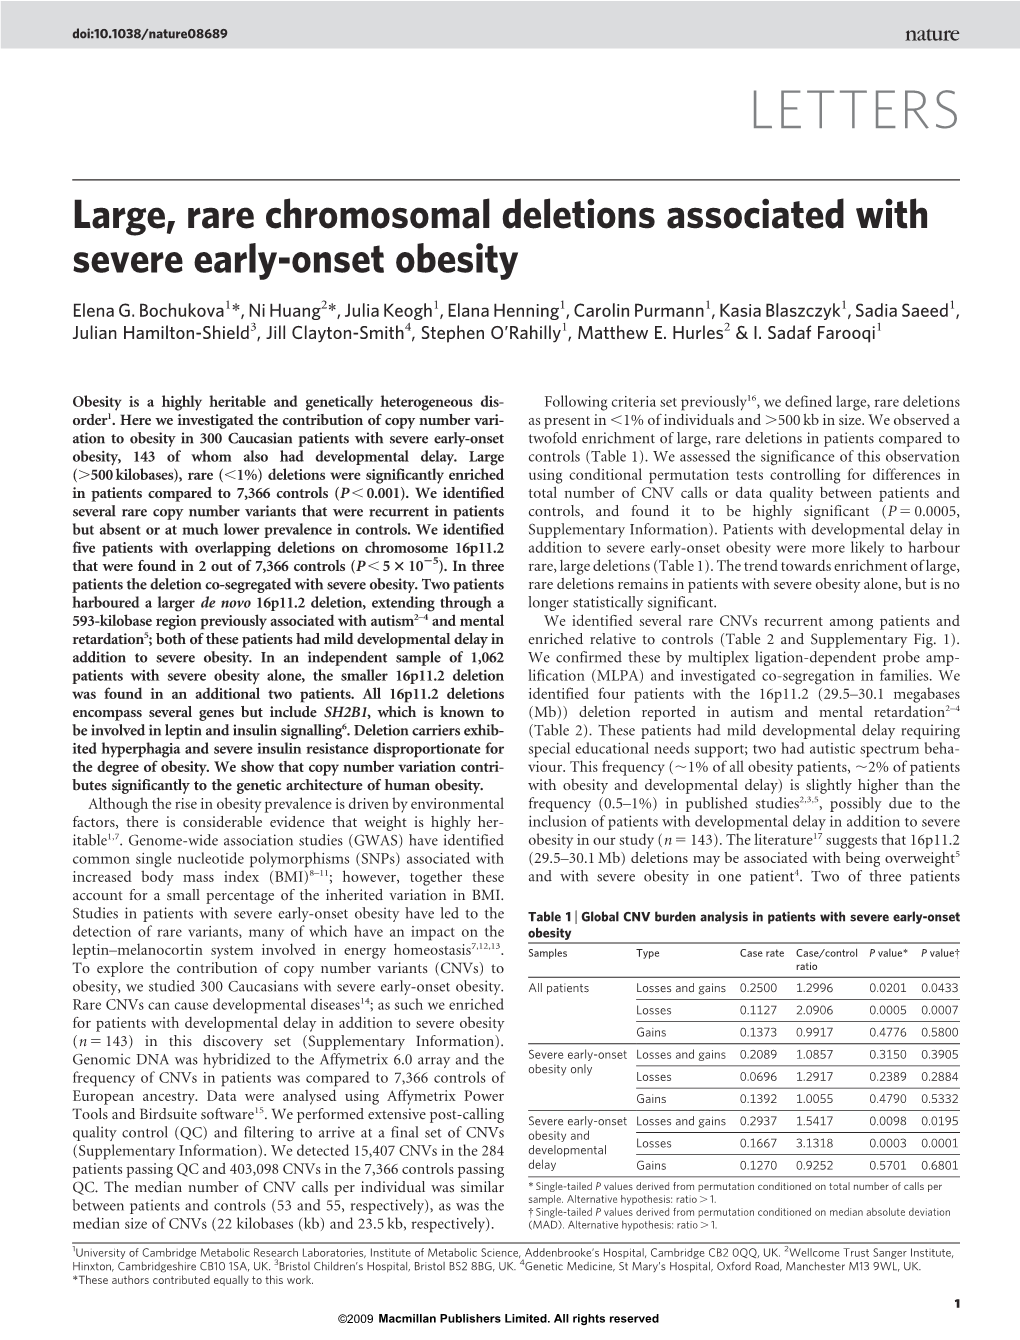 Large, Rare Chromosomal Deletions Associated with Severe Early-Onset Obesity